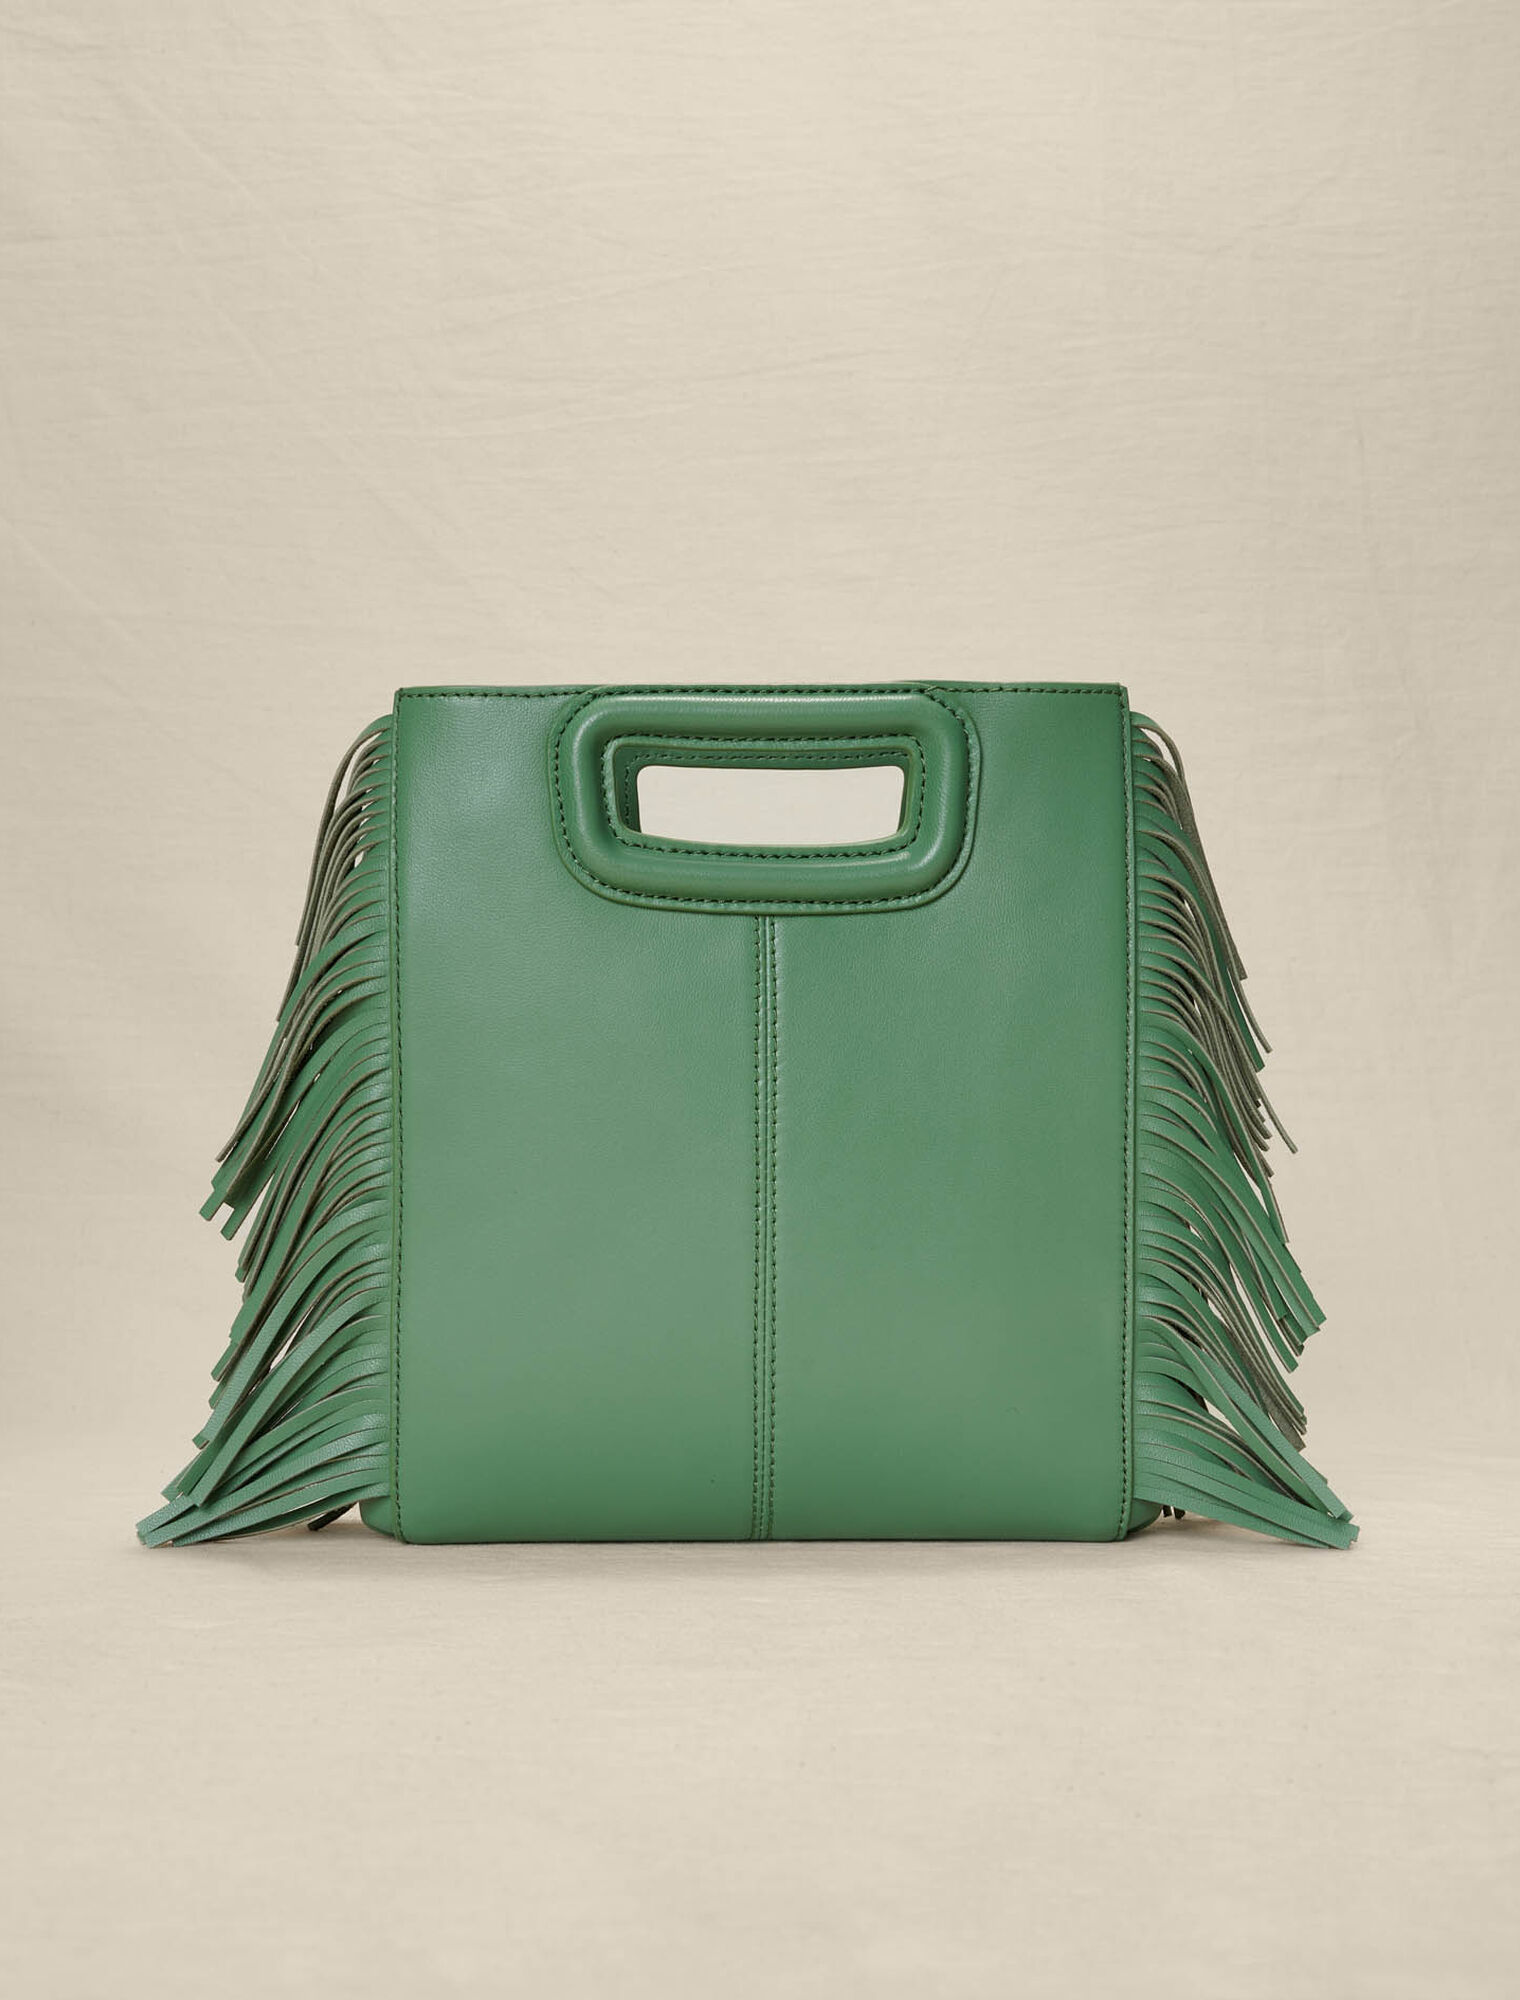 Perforated, fringed leather M bag